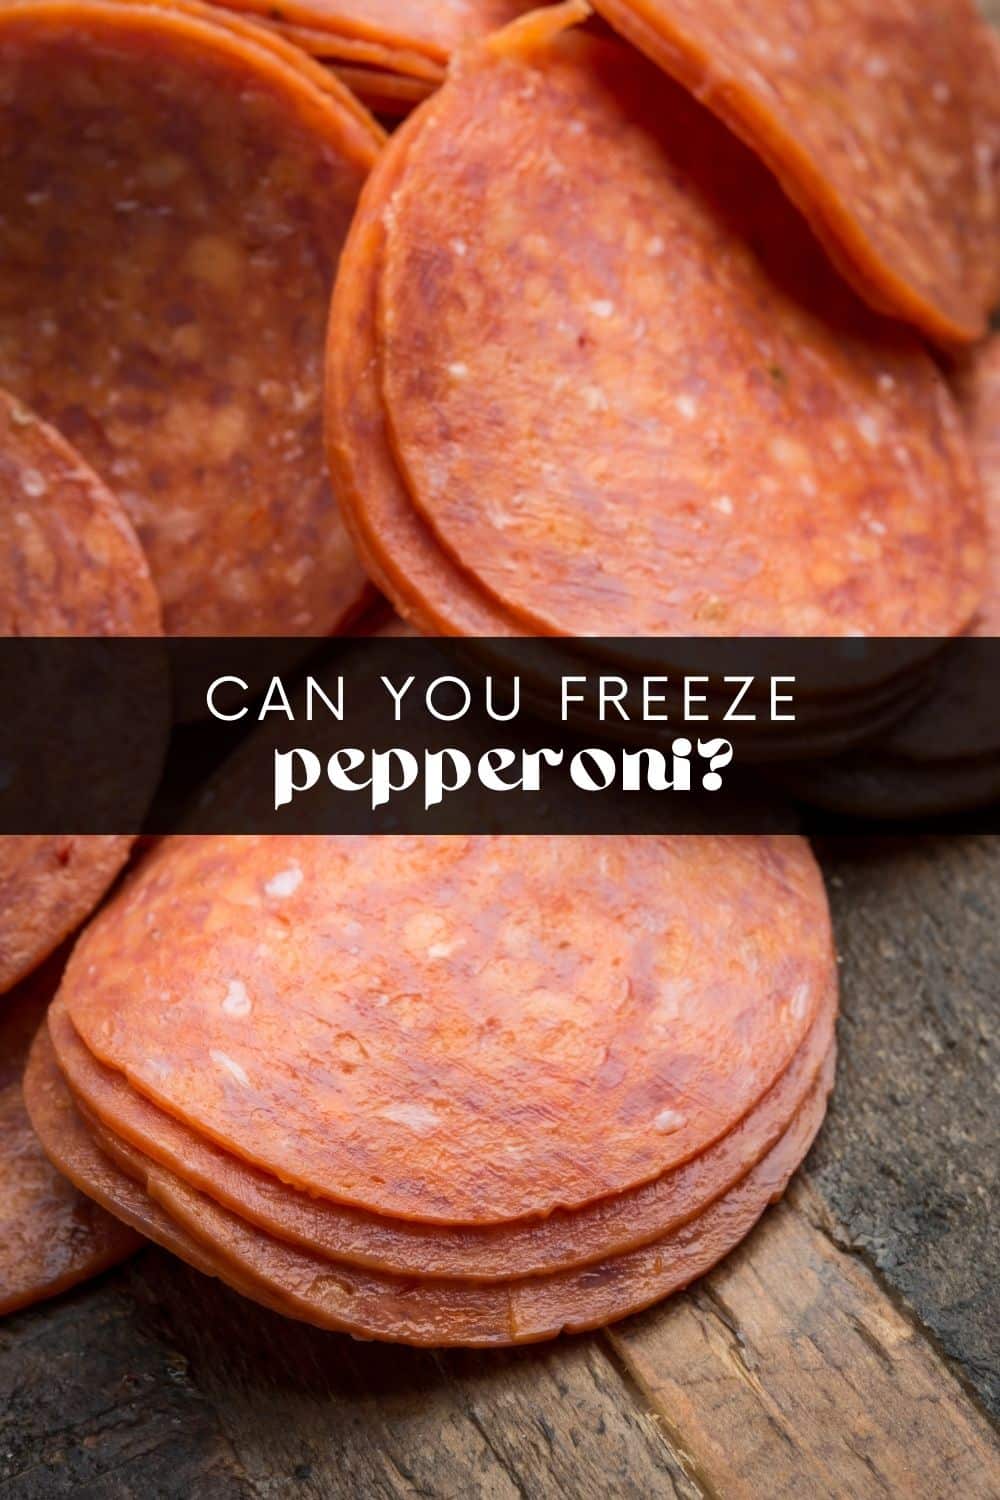 You might think cured meat like pepperoni can last for months in the fridge, but this isn't true. An opened packet of pepperoni will only last a week or two when stored correctly! We all know freezing food is a great way to make it last longer, but can you freeze pepperoni?